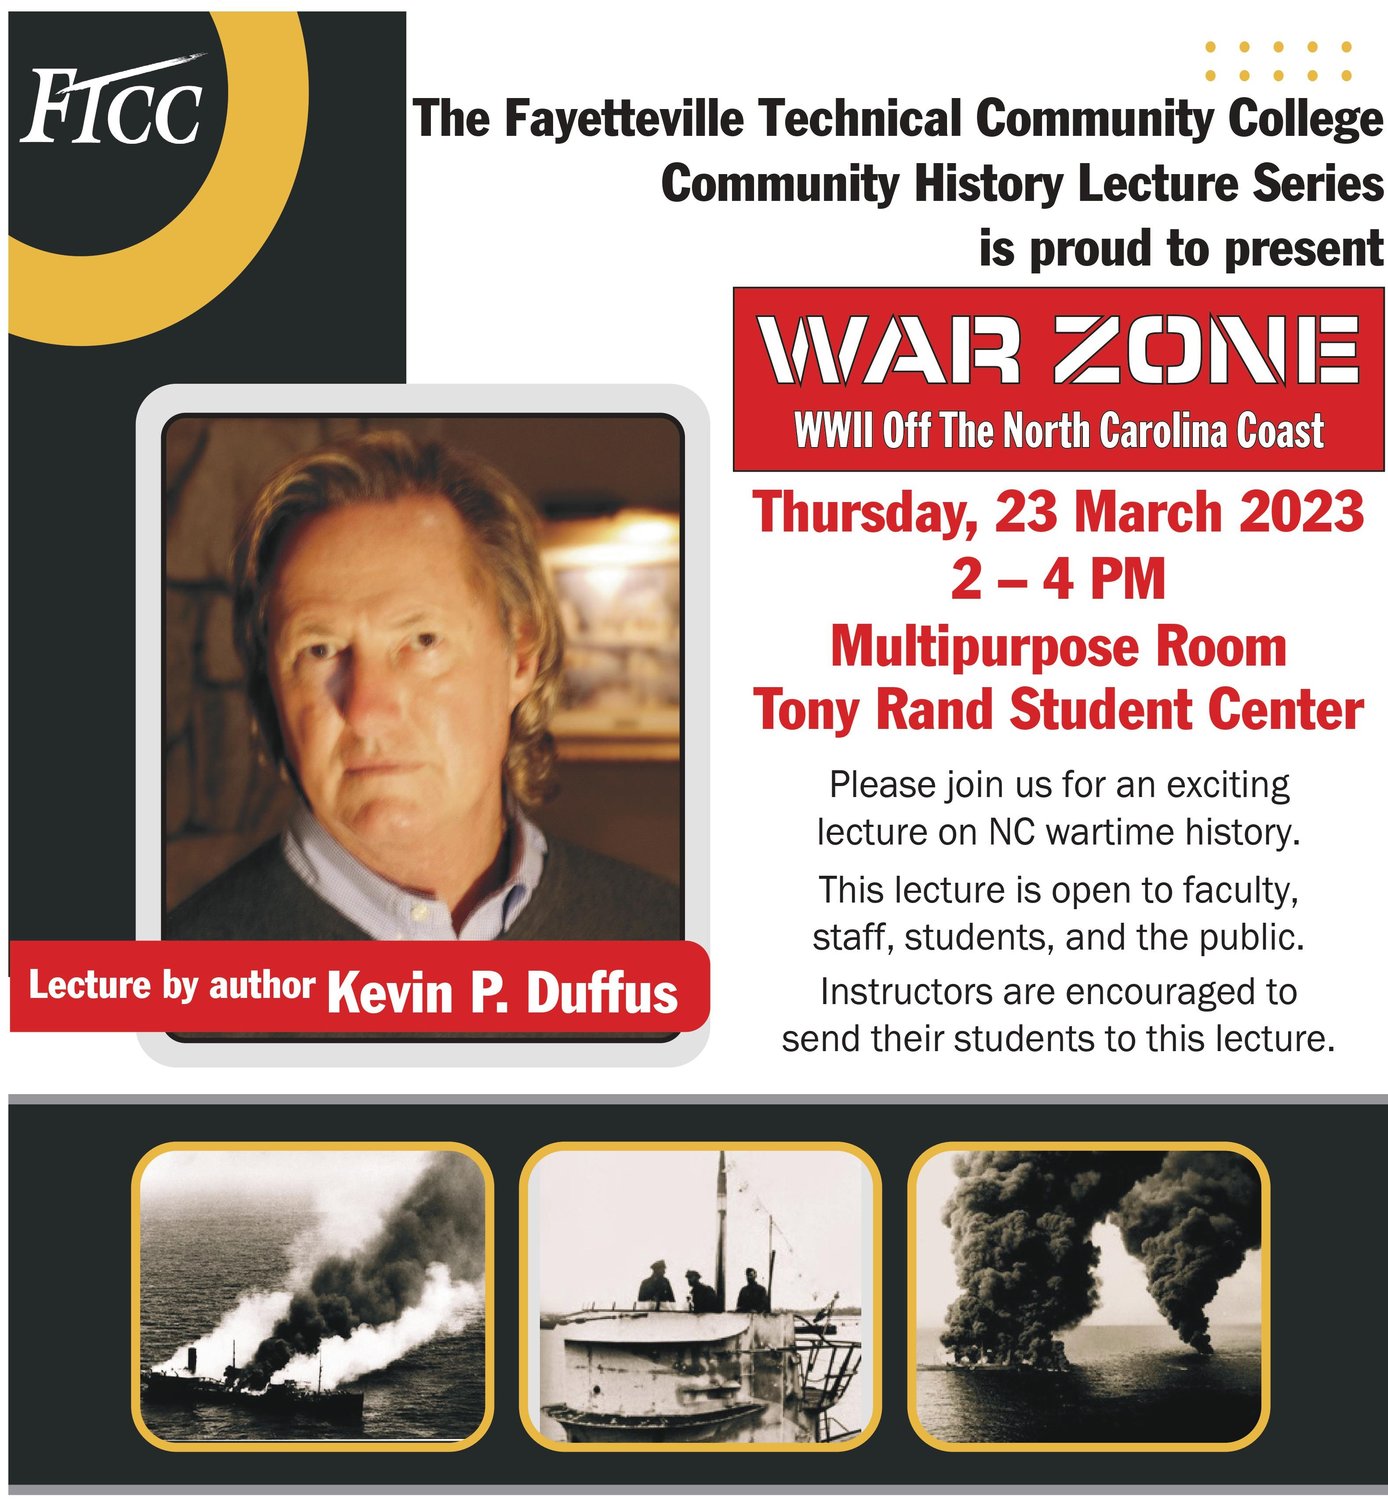 Kevin P. Duffus will speak on German U-boat attacks in a lecture at Fayetteville Technical Community College.